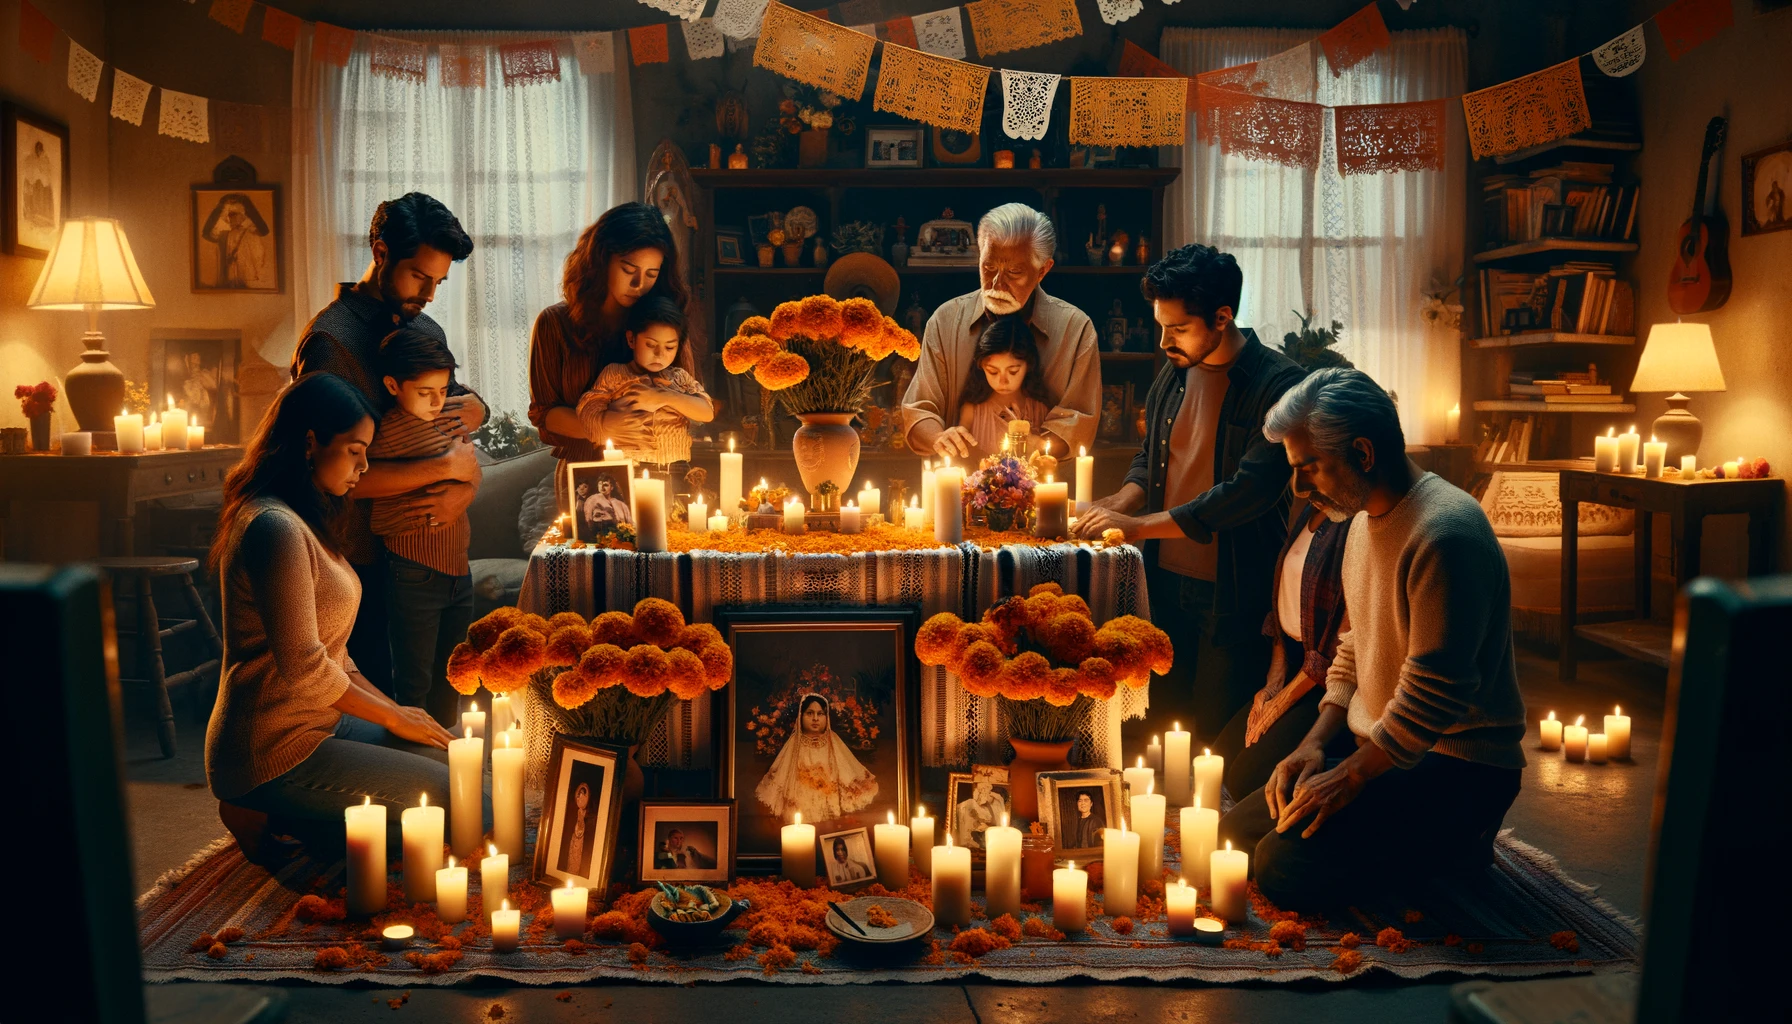 Create a rectangular image depicting an Hispanic grief ritual, illustrating a family gathering around an ofrenda (altar) adorned with candles,